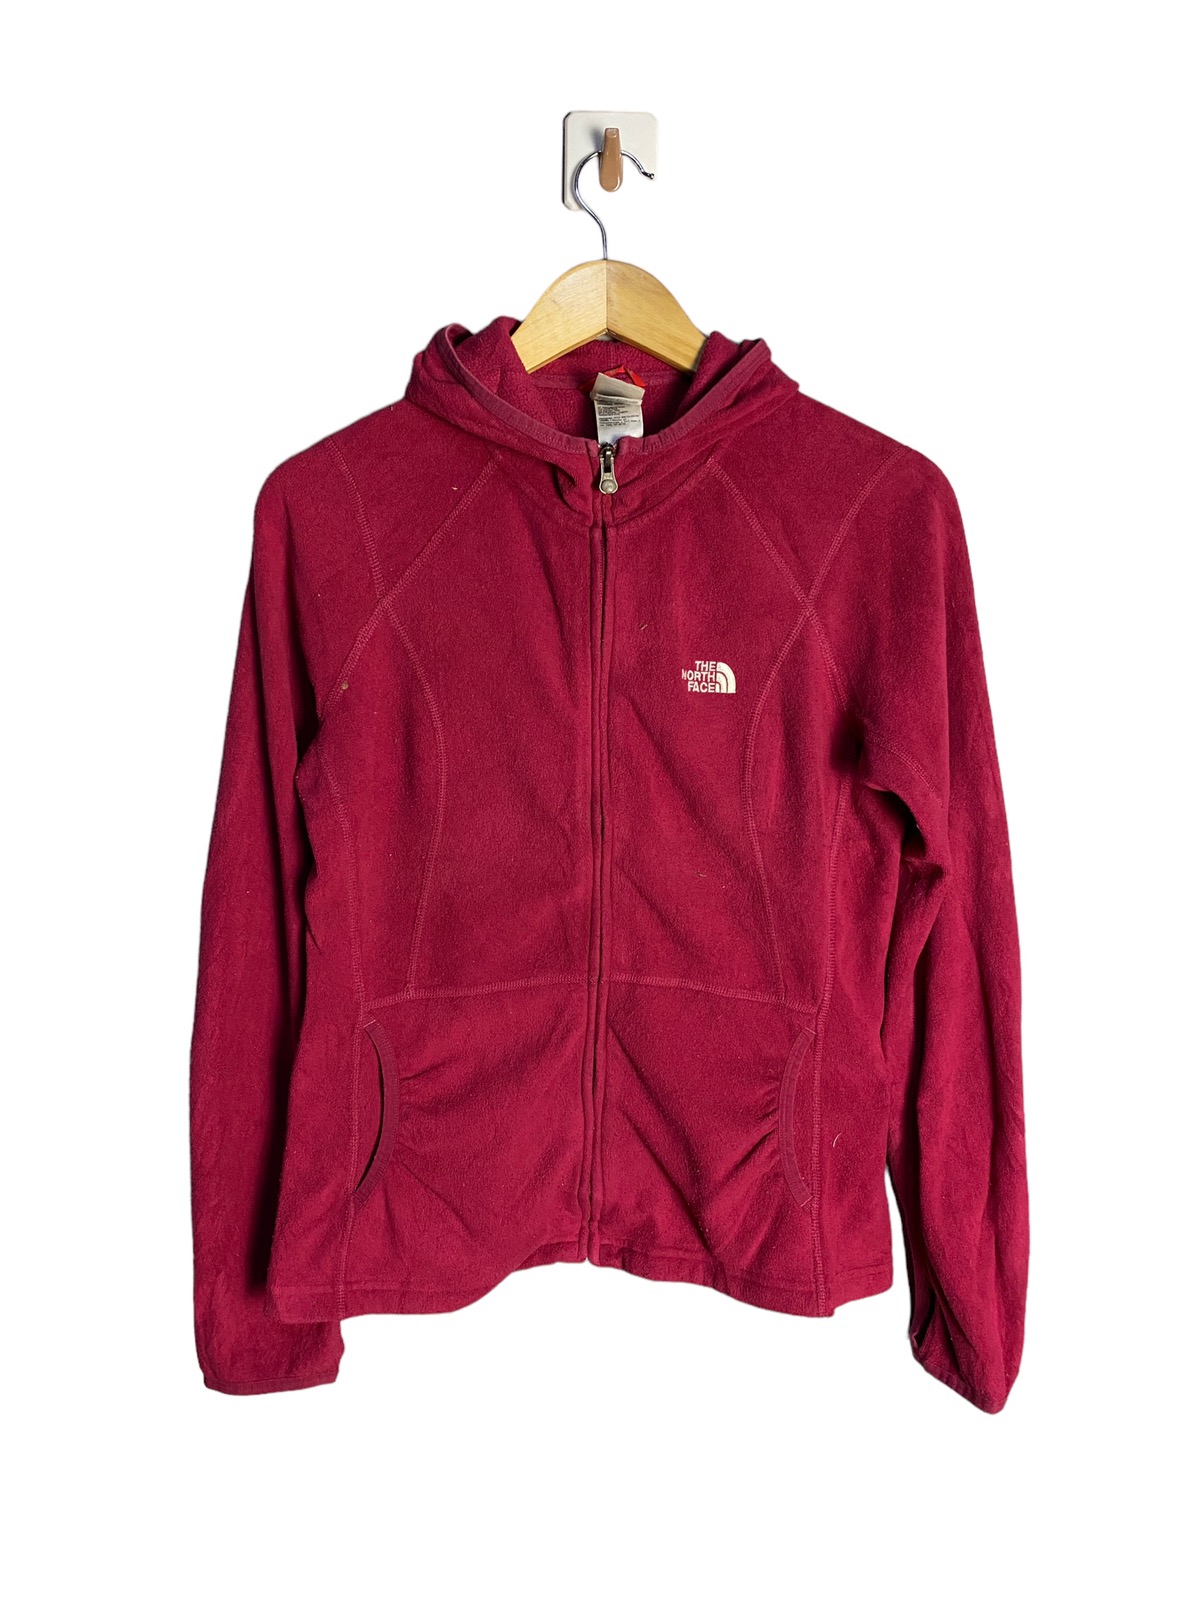 🔥SALE🔥THE NORTH FACE HOODIE - 1